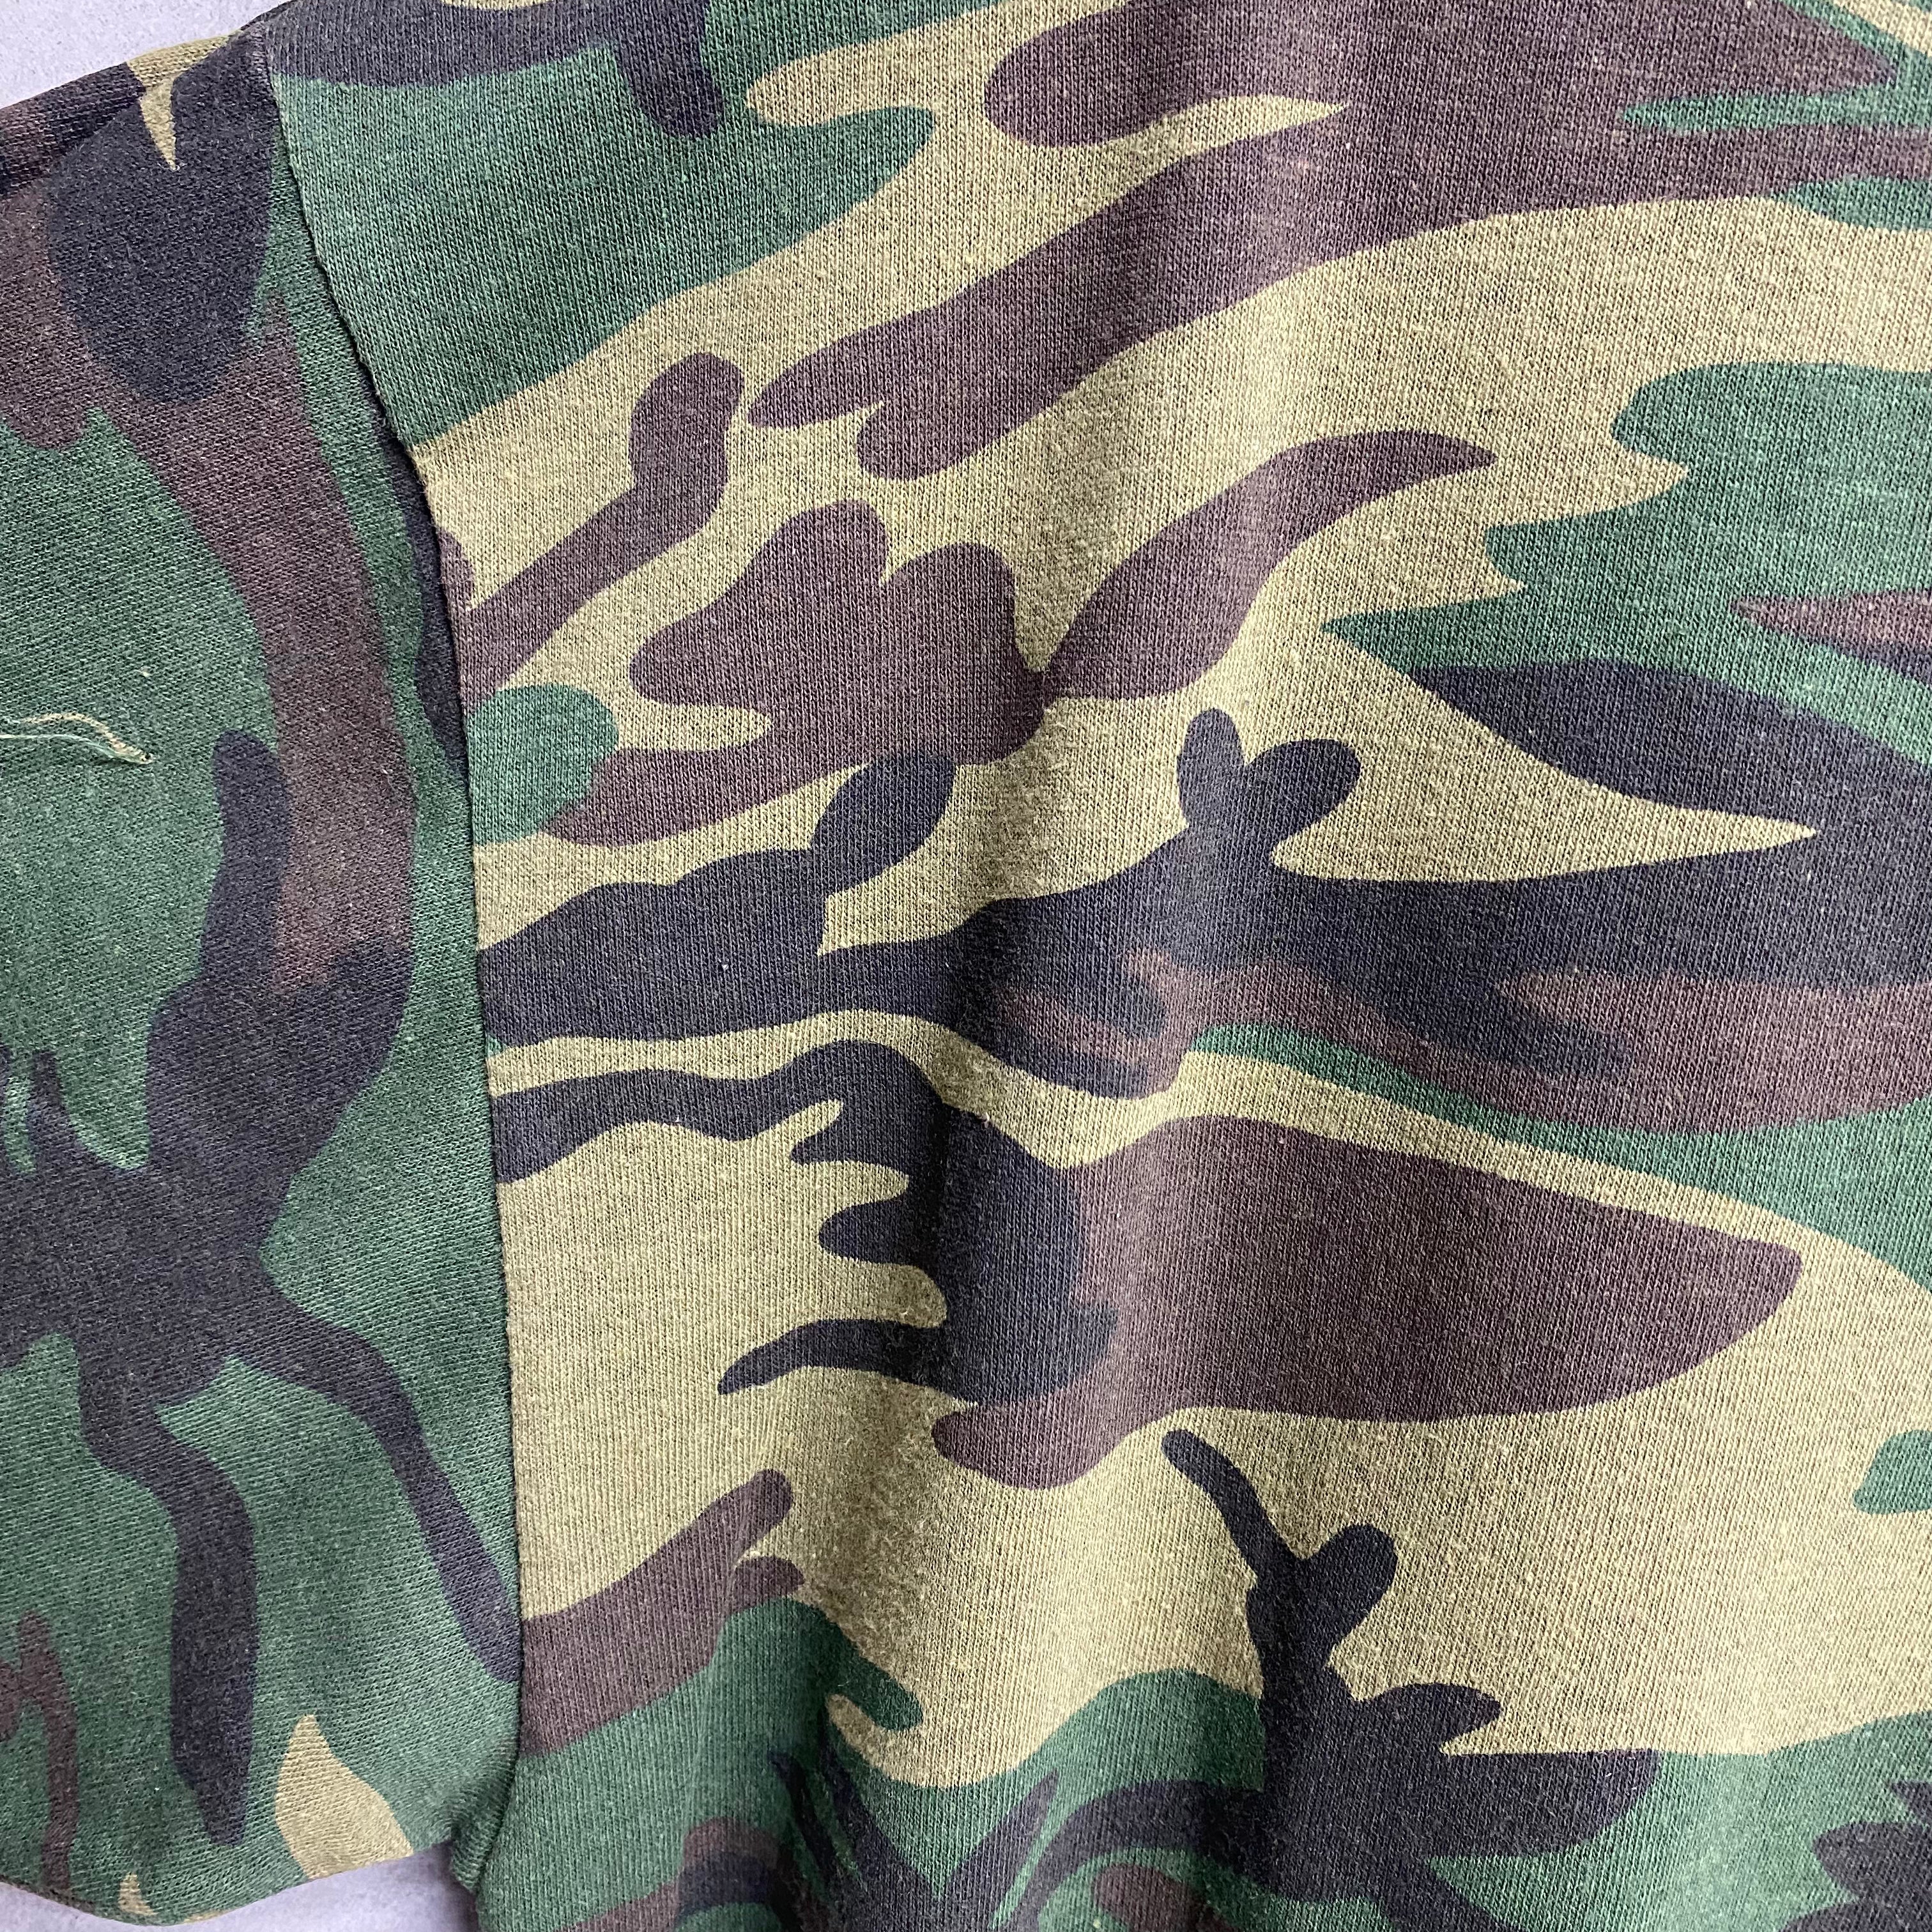 [ ONLY ONE ! ] CAMOUFLAGE POCKET SHORT SLEEVE T-SHIRT / Mr.Clean Select